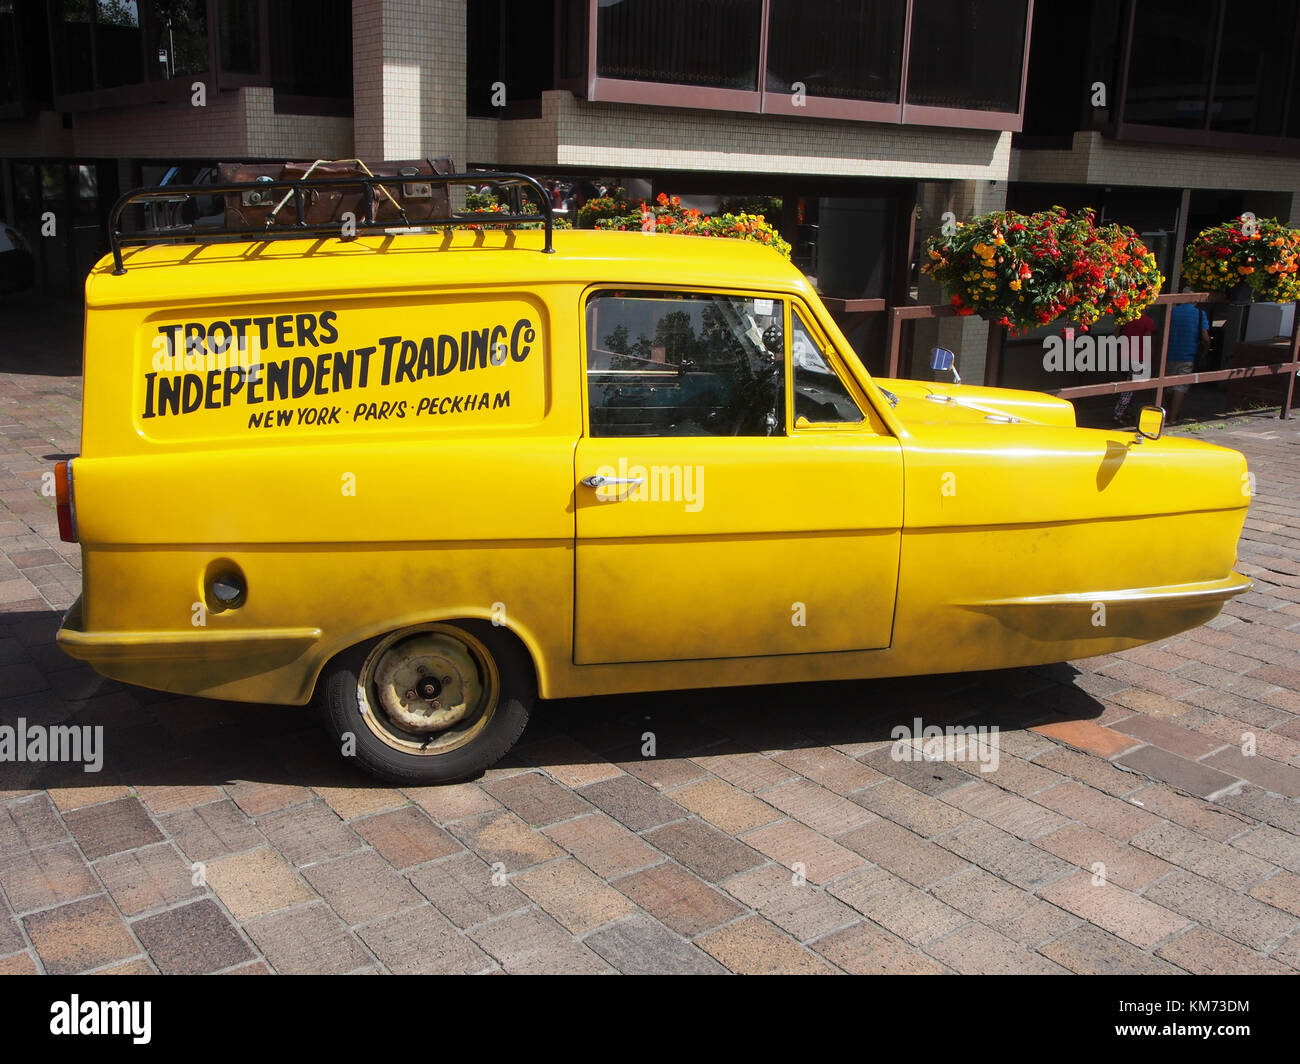 A Reliant Rega lsupervan painted to replicate the vehicle used in the BBC TV Series Only fools and horses. Stock Photo